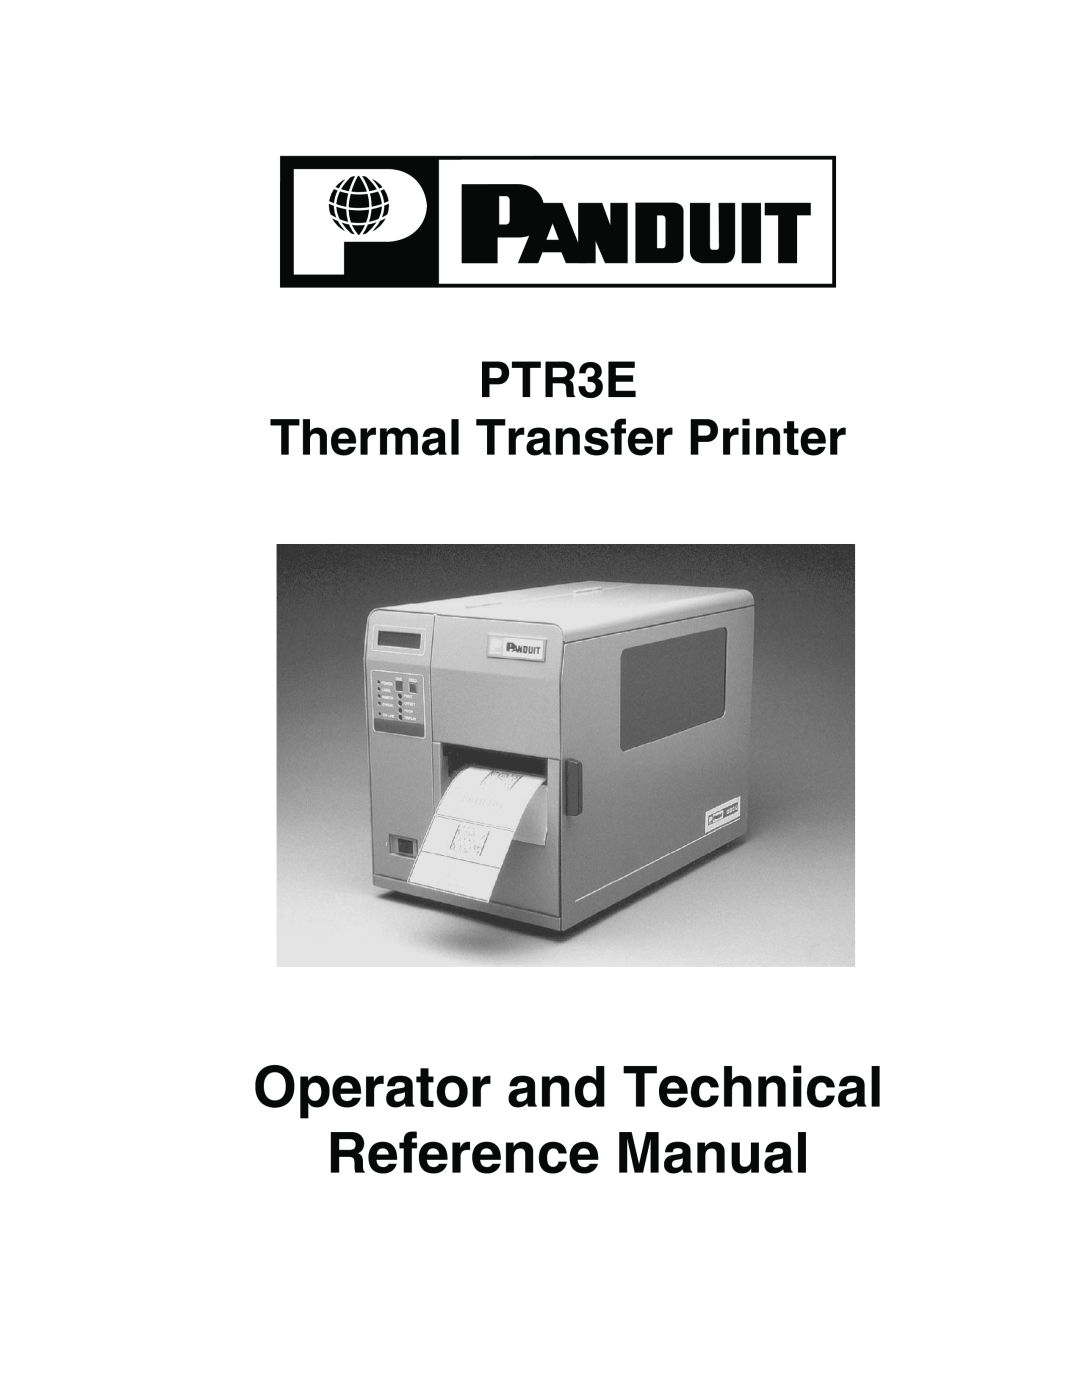 Panduit manual Operator and Technical Reference Manual, PTR3E Thermal Transfer Printer 